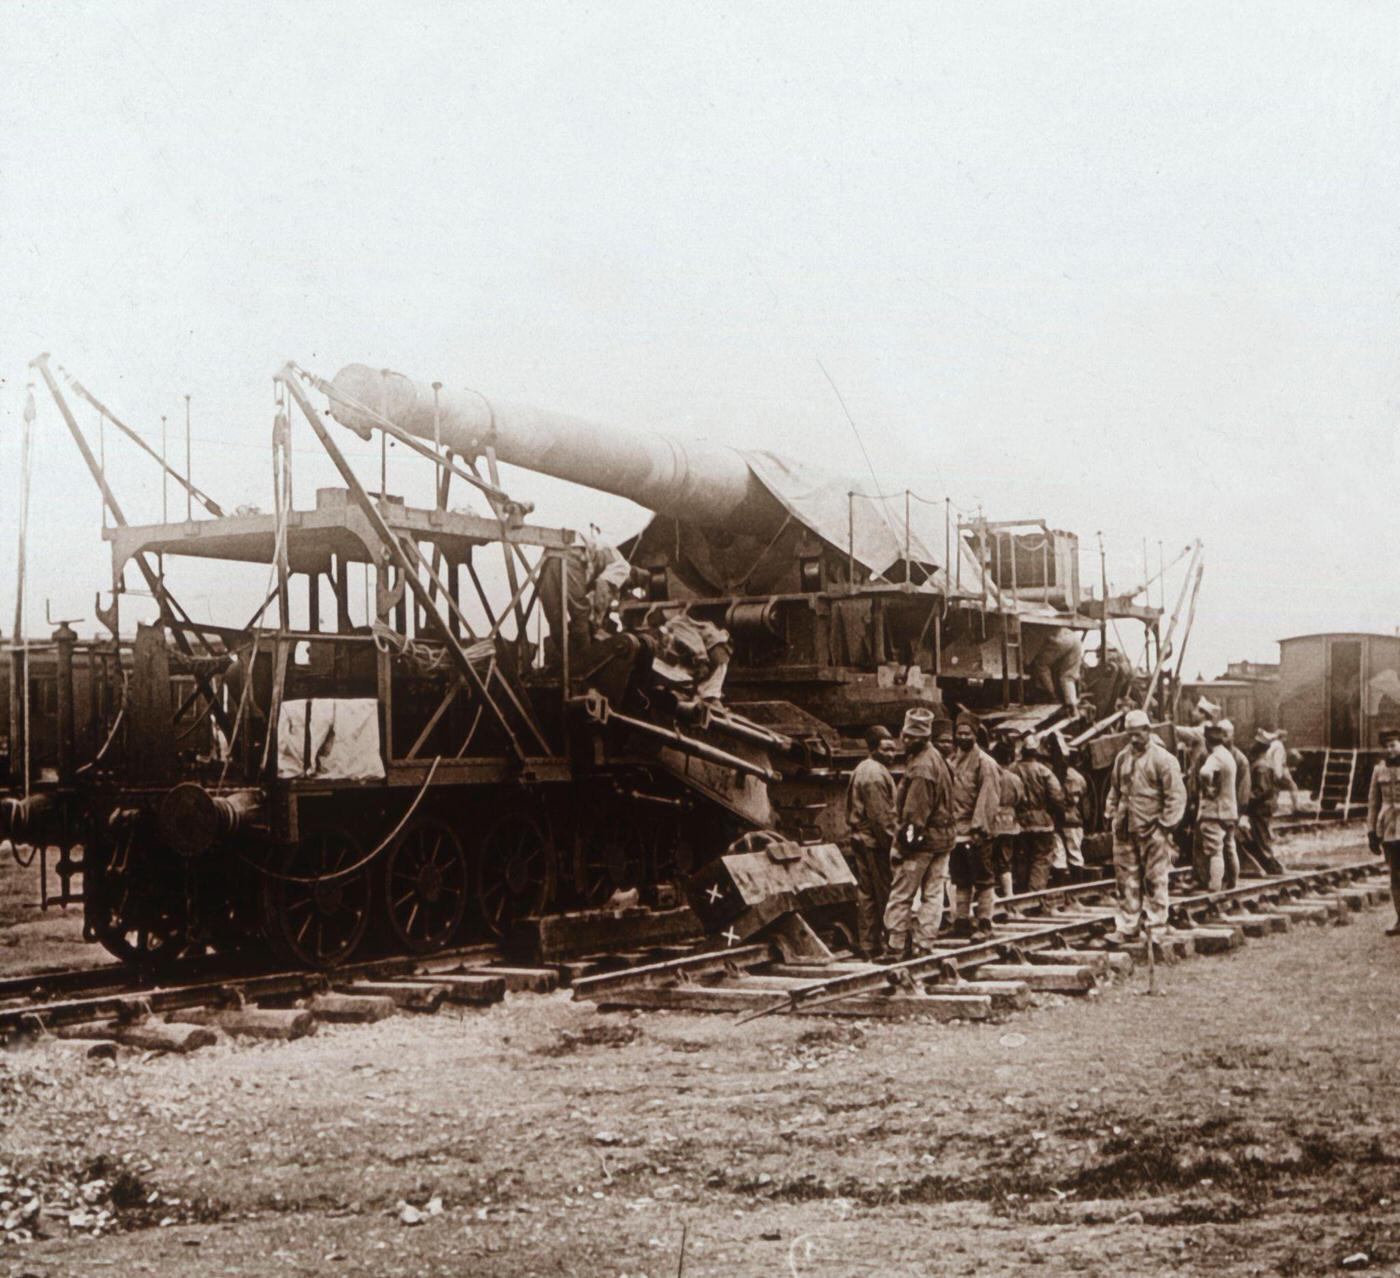 African troops and heavy artillery mounted on a train in Champagne, northern France, 1914-1918.